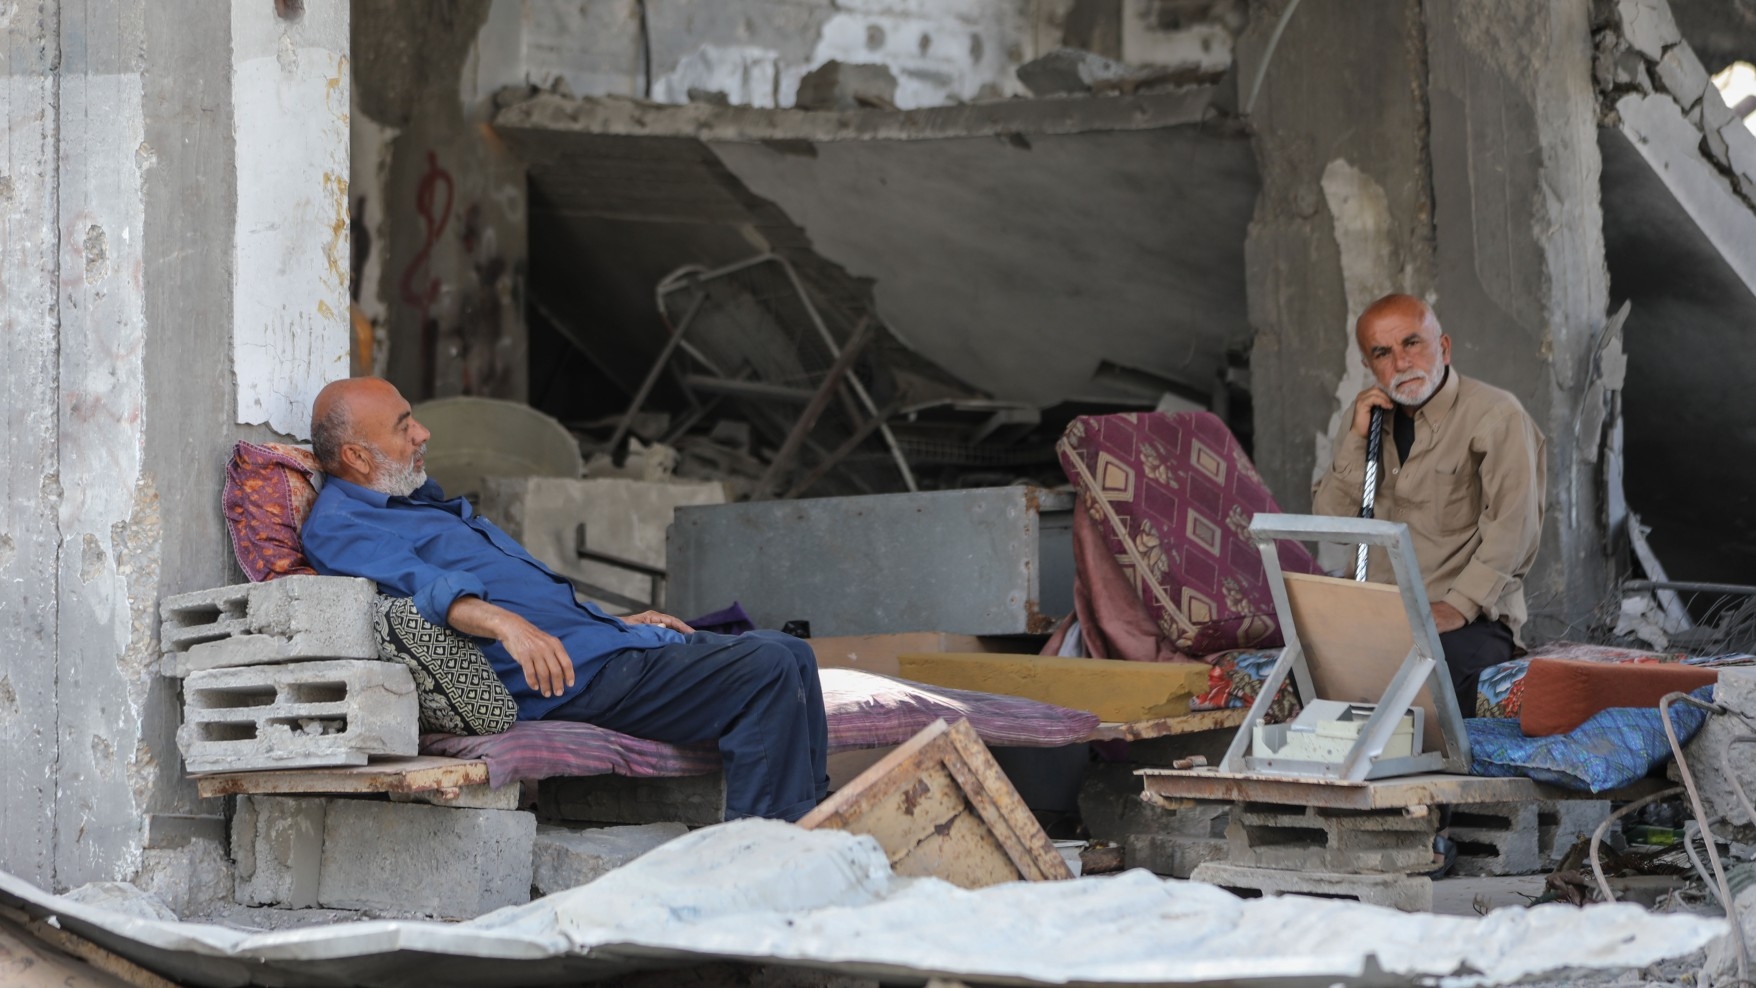 Two Palestinian men sit amid the rubble of their home in Gaza City that was targeted by Israeli fighter jets (MEE/Mohammed al-Hajjar)